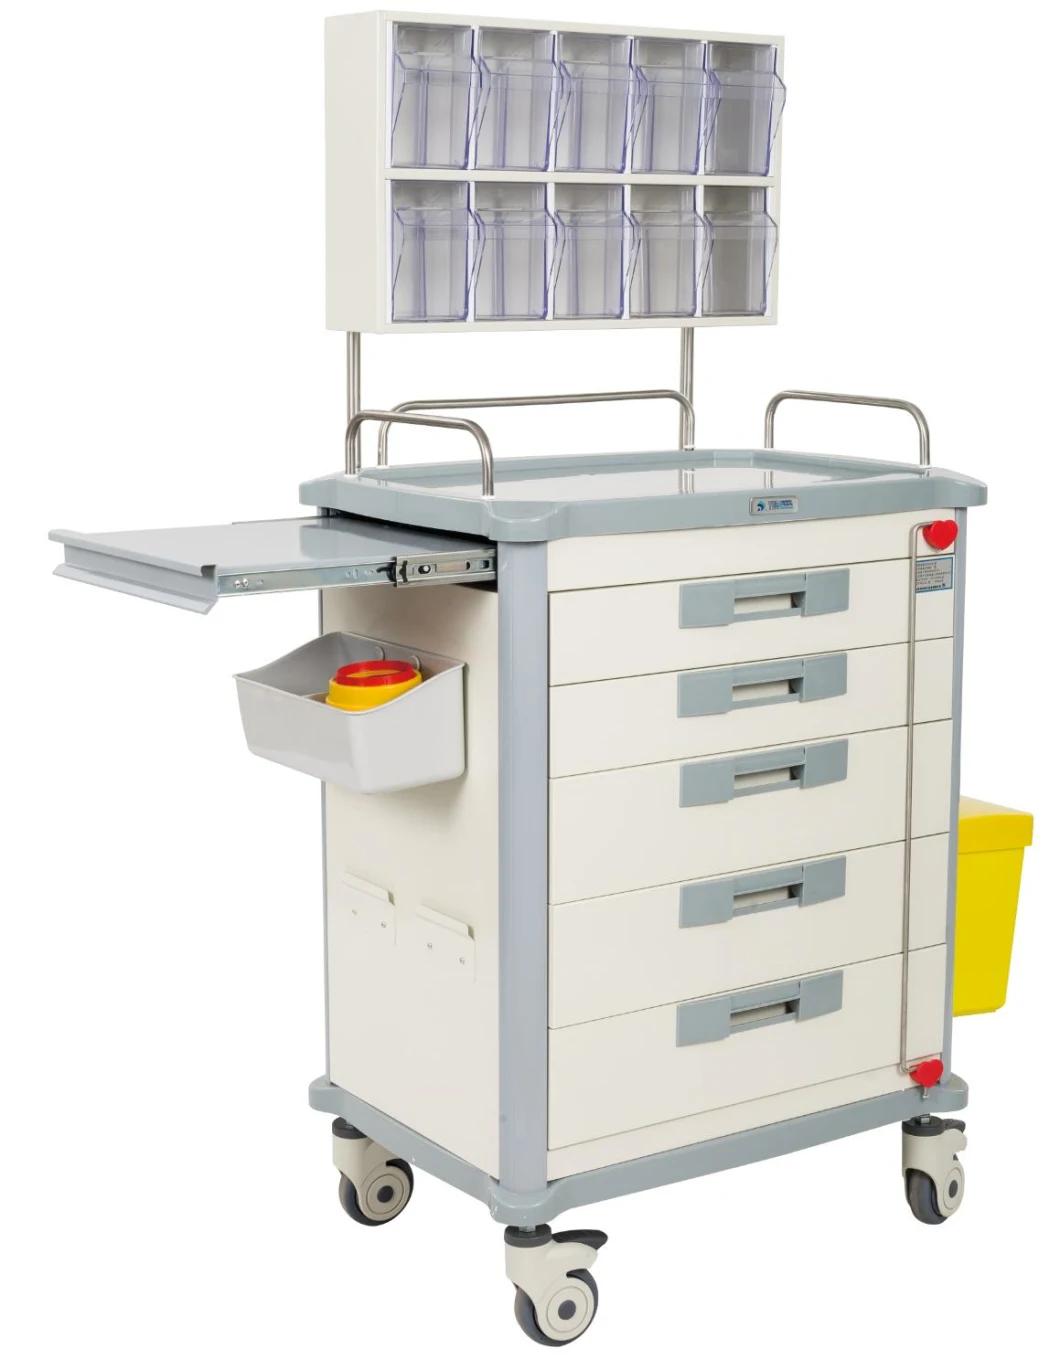 Mt Medical Hot Sales Medical Equipment ABS Anesthesia Emergency Trolley Cart Prices